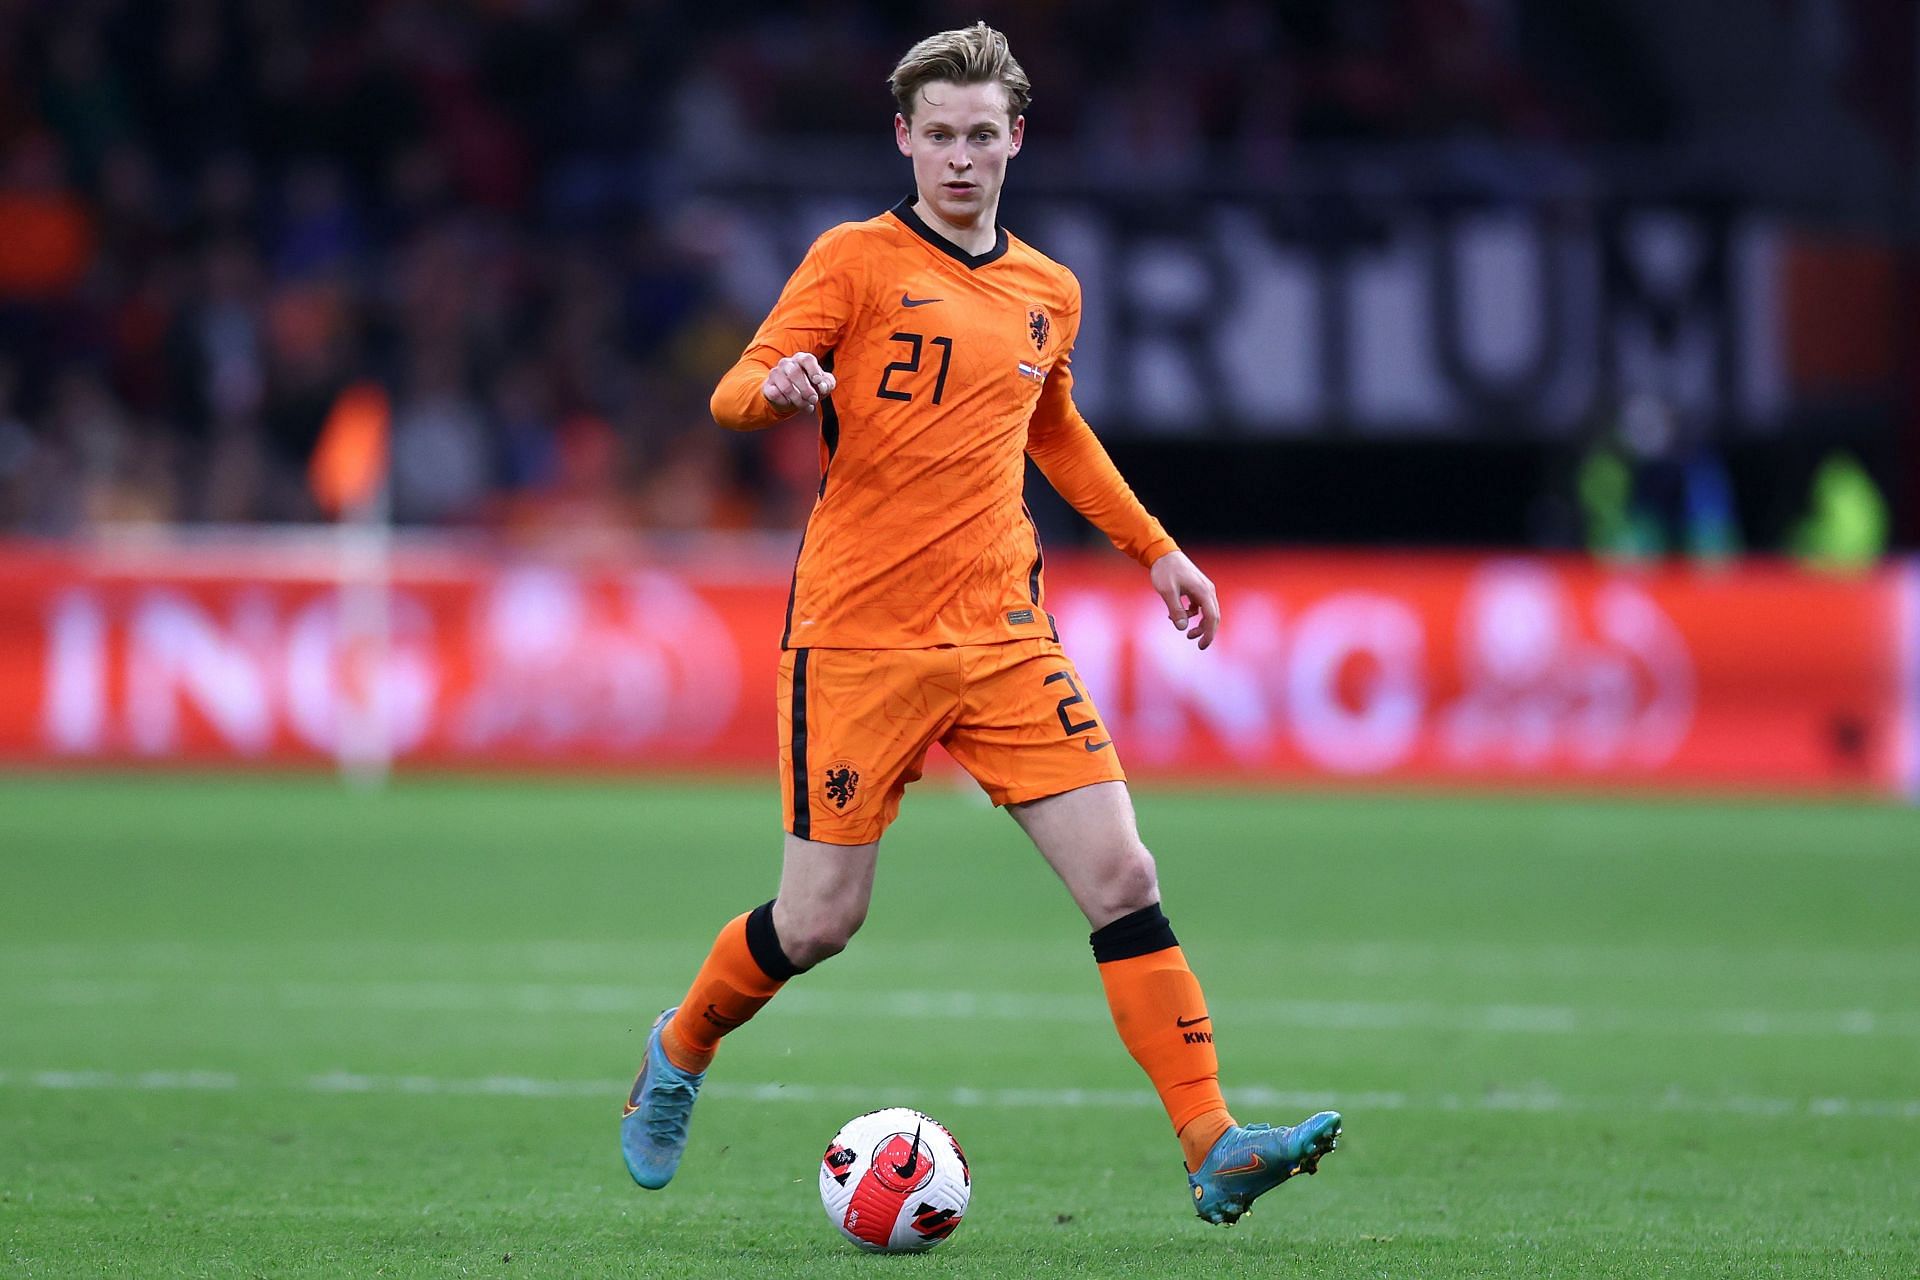 Frenkie has been great since his early days